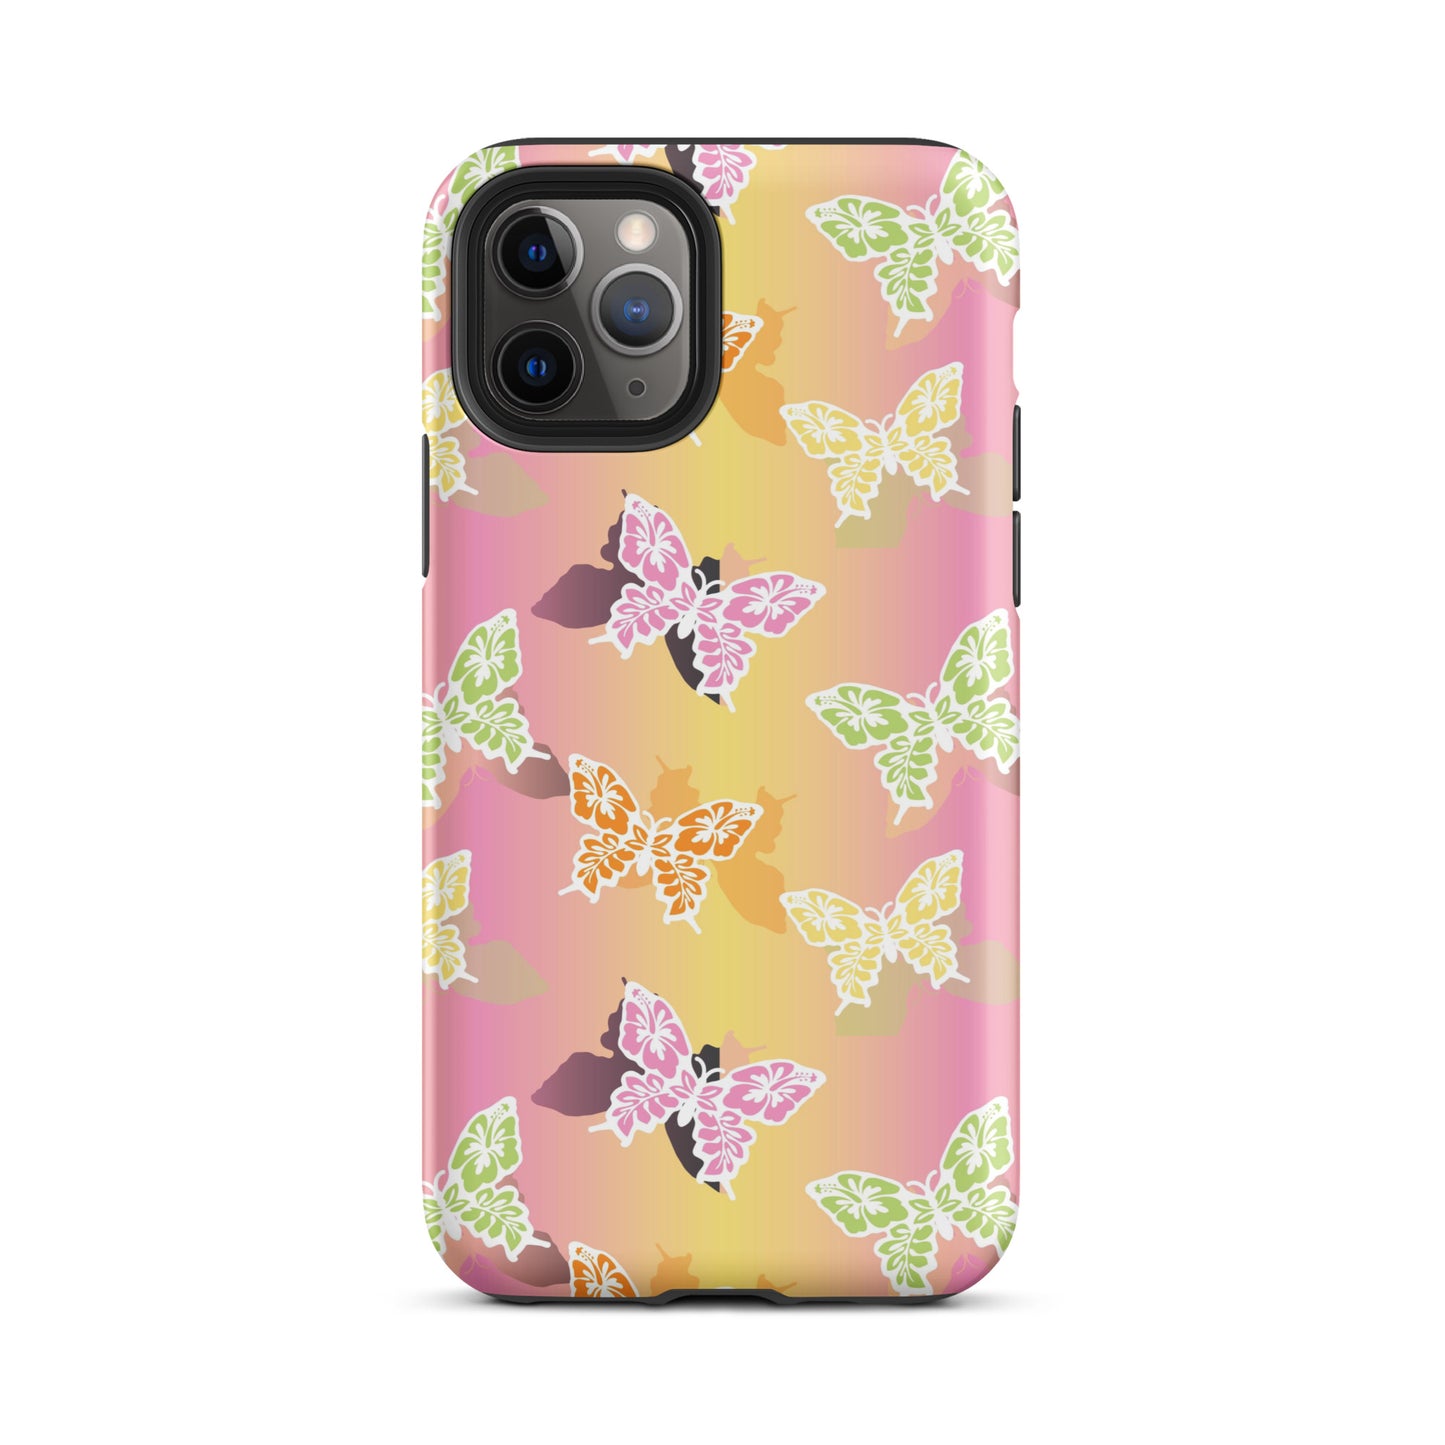 Butterfly Gradient iPhone Case Matte iPhone 11 Pro